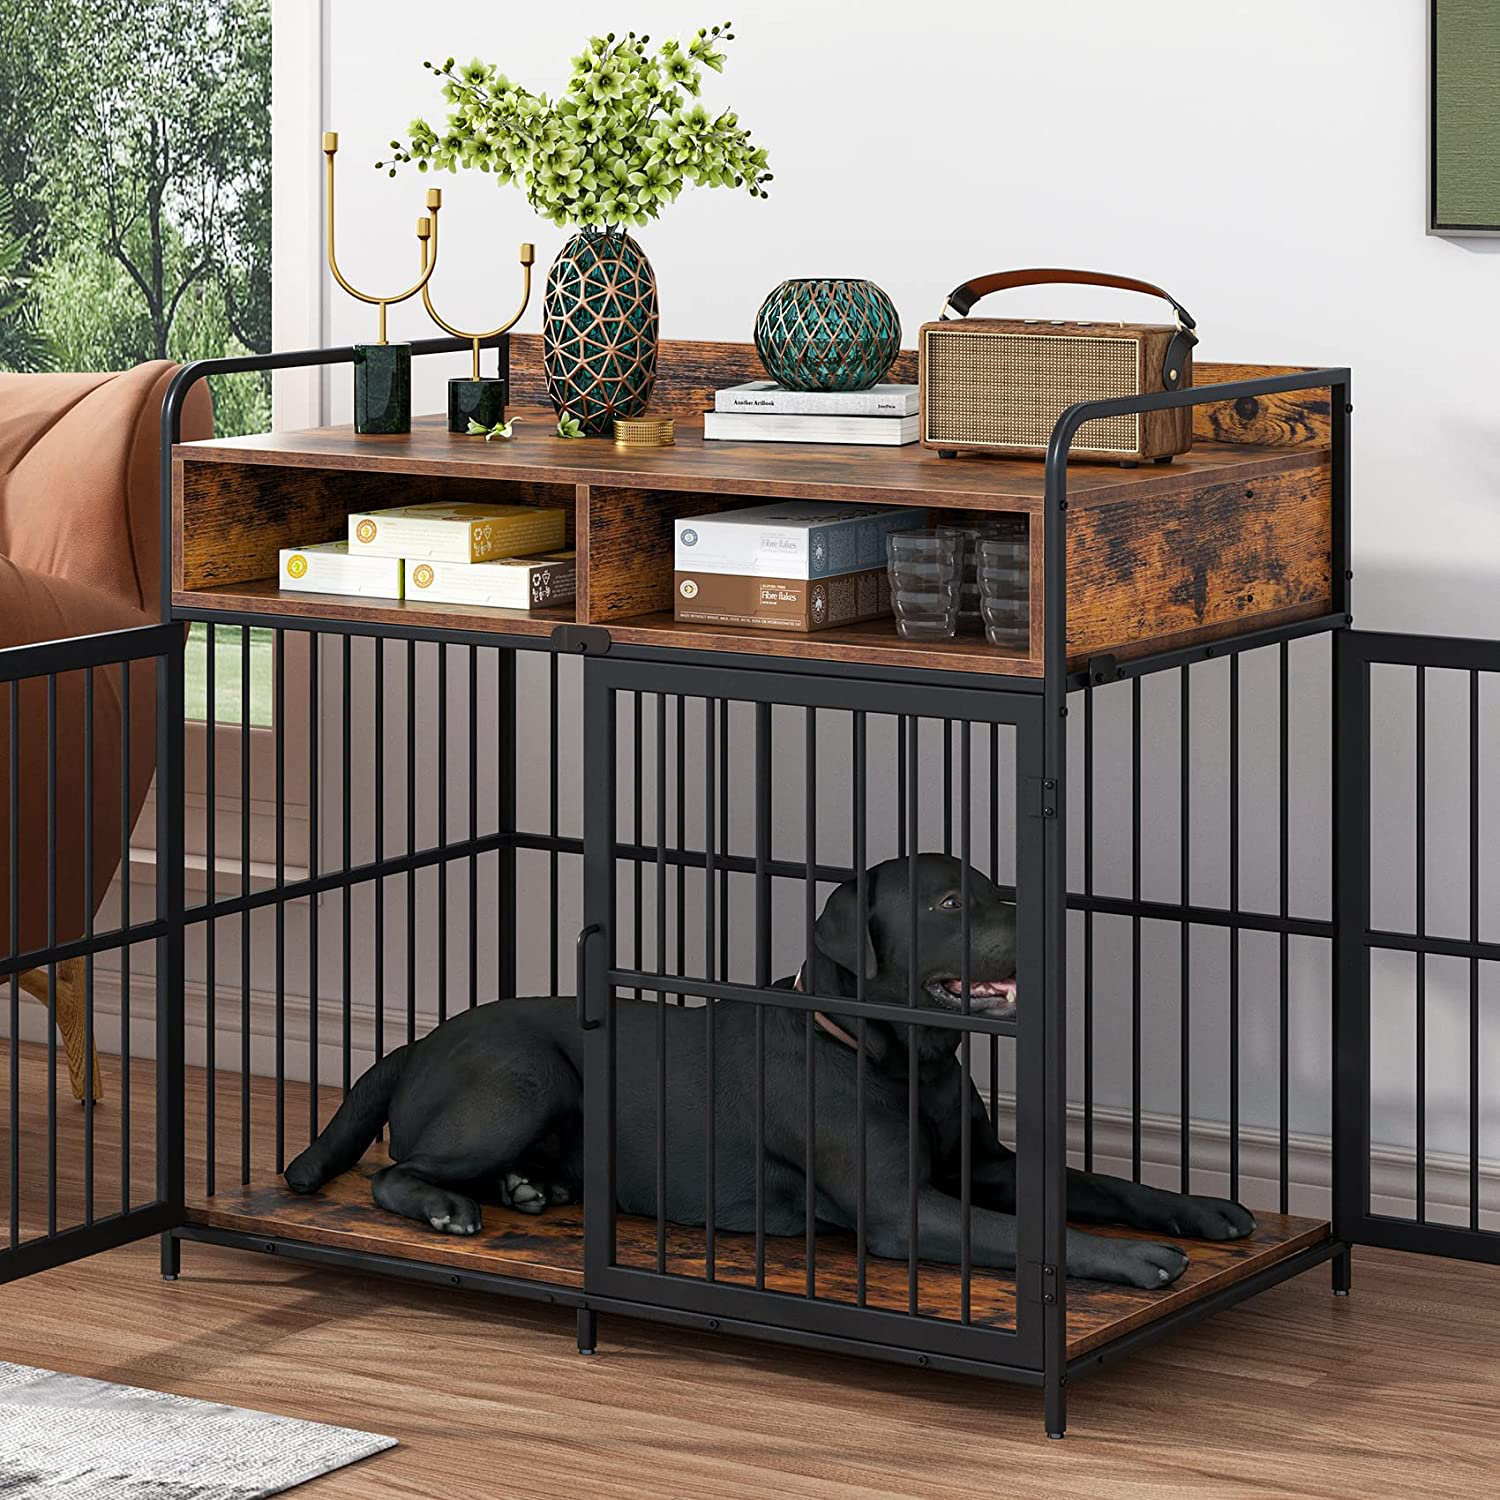 Immere 38 Inch Dog Crate Furniture, Puppy Dog Kennel Indoor, Wood Dog Cage  Table Heavy Duty Dog Crate, Jaula para Perros, Sturdy Metal 